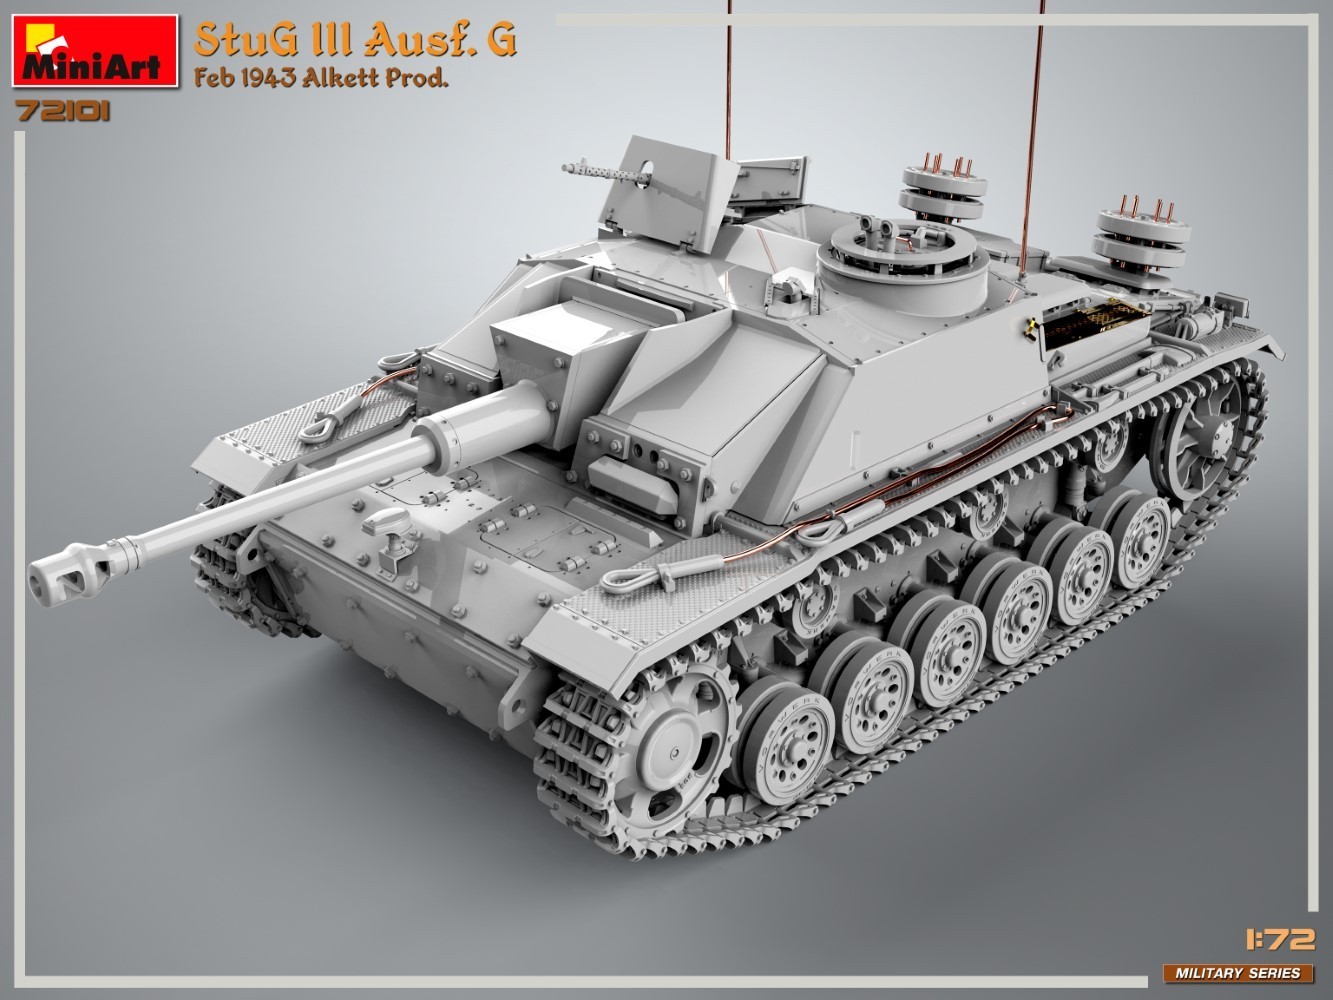 New Military Series Announced in 1/72 Scale, Starting with StuG III Ausf. G CAD-5